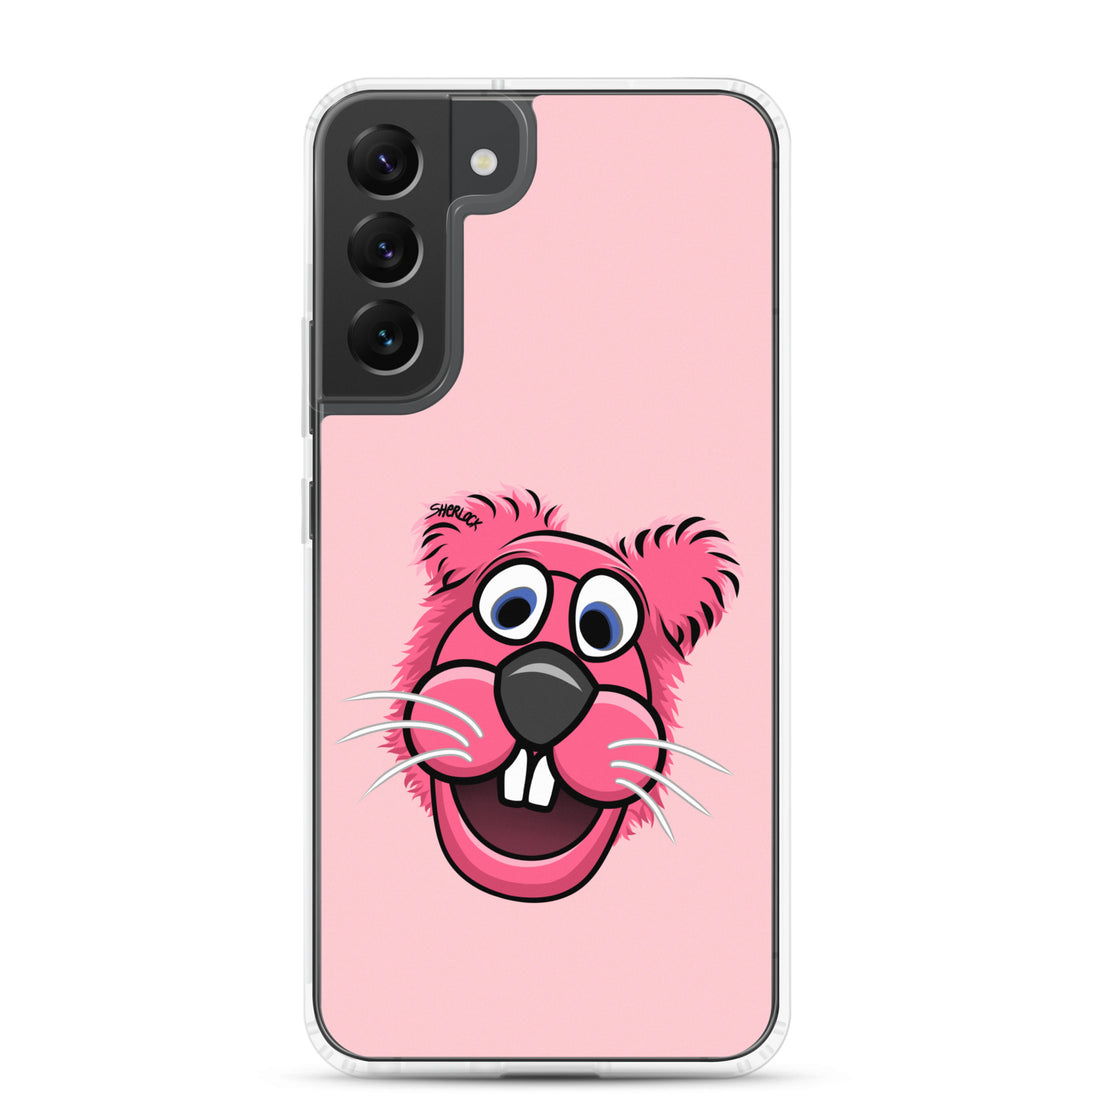 Sherlock The Squirrel Samsung Phone Cover, Pink